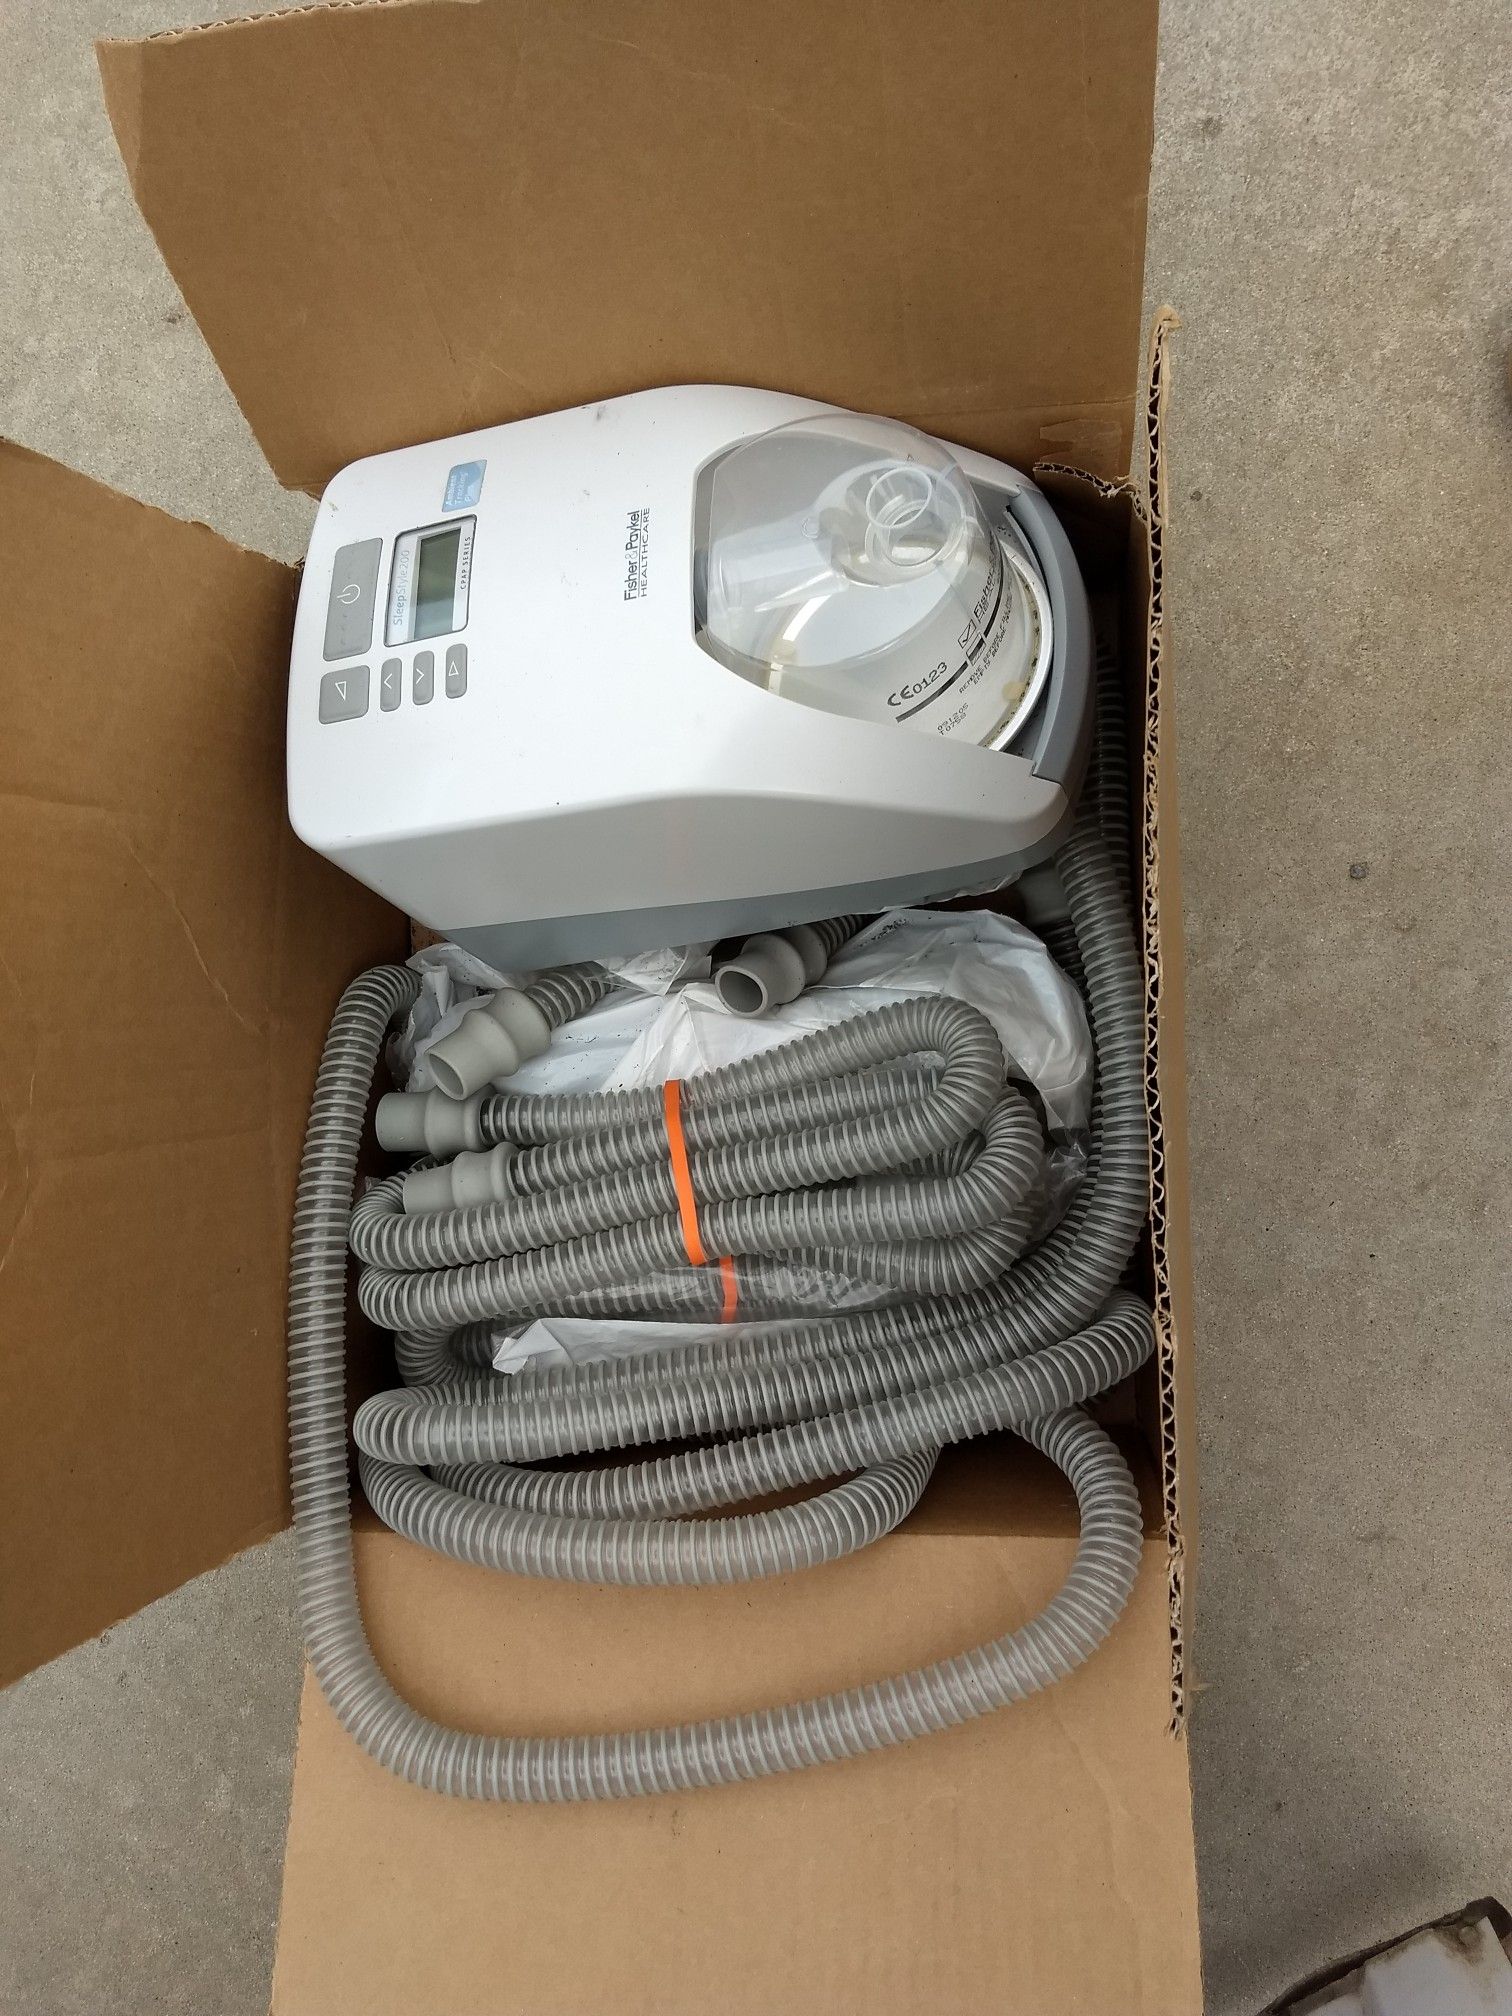 CPAP machine with extra hoses slightly used to see if it worked I am trying to locate the AC cord